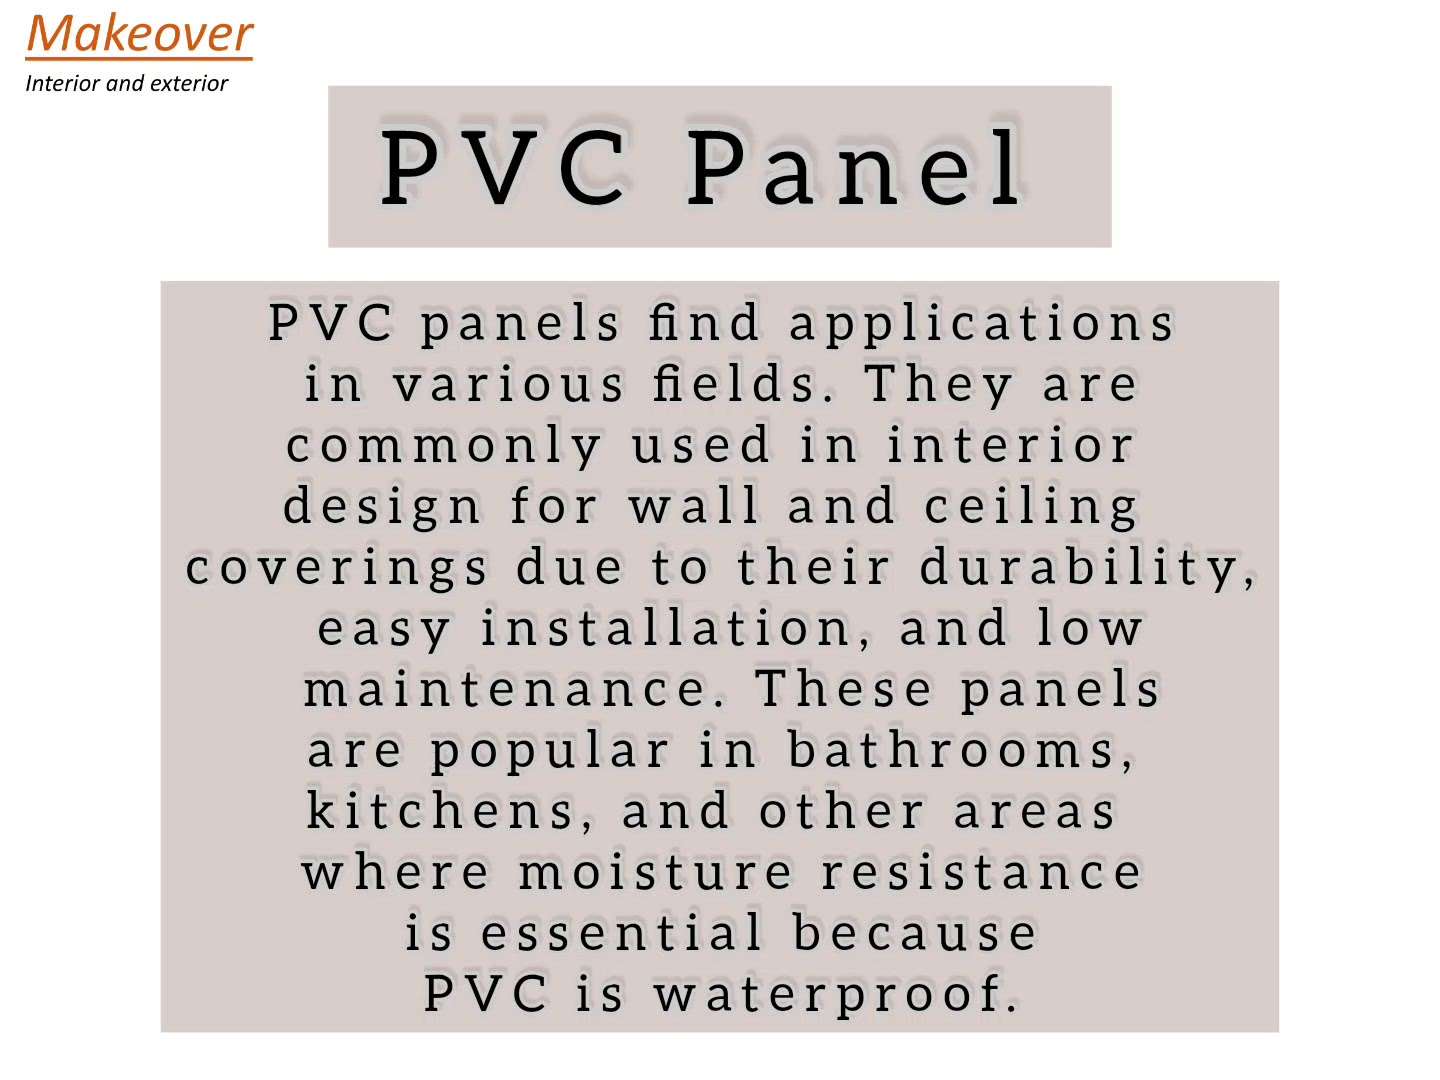 PVC Panel available in wholesale price...any requirement now or in future please contact us 9810980278/9810980397